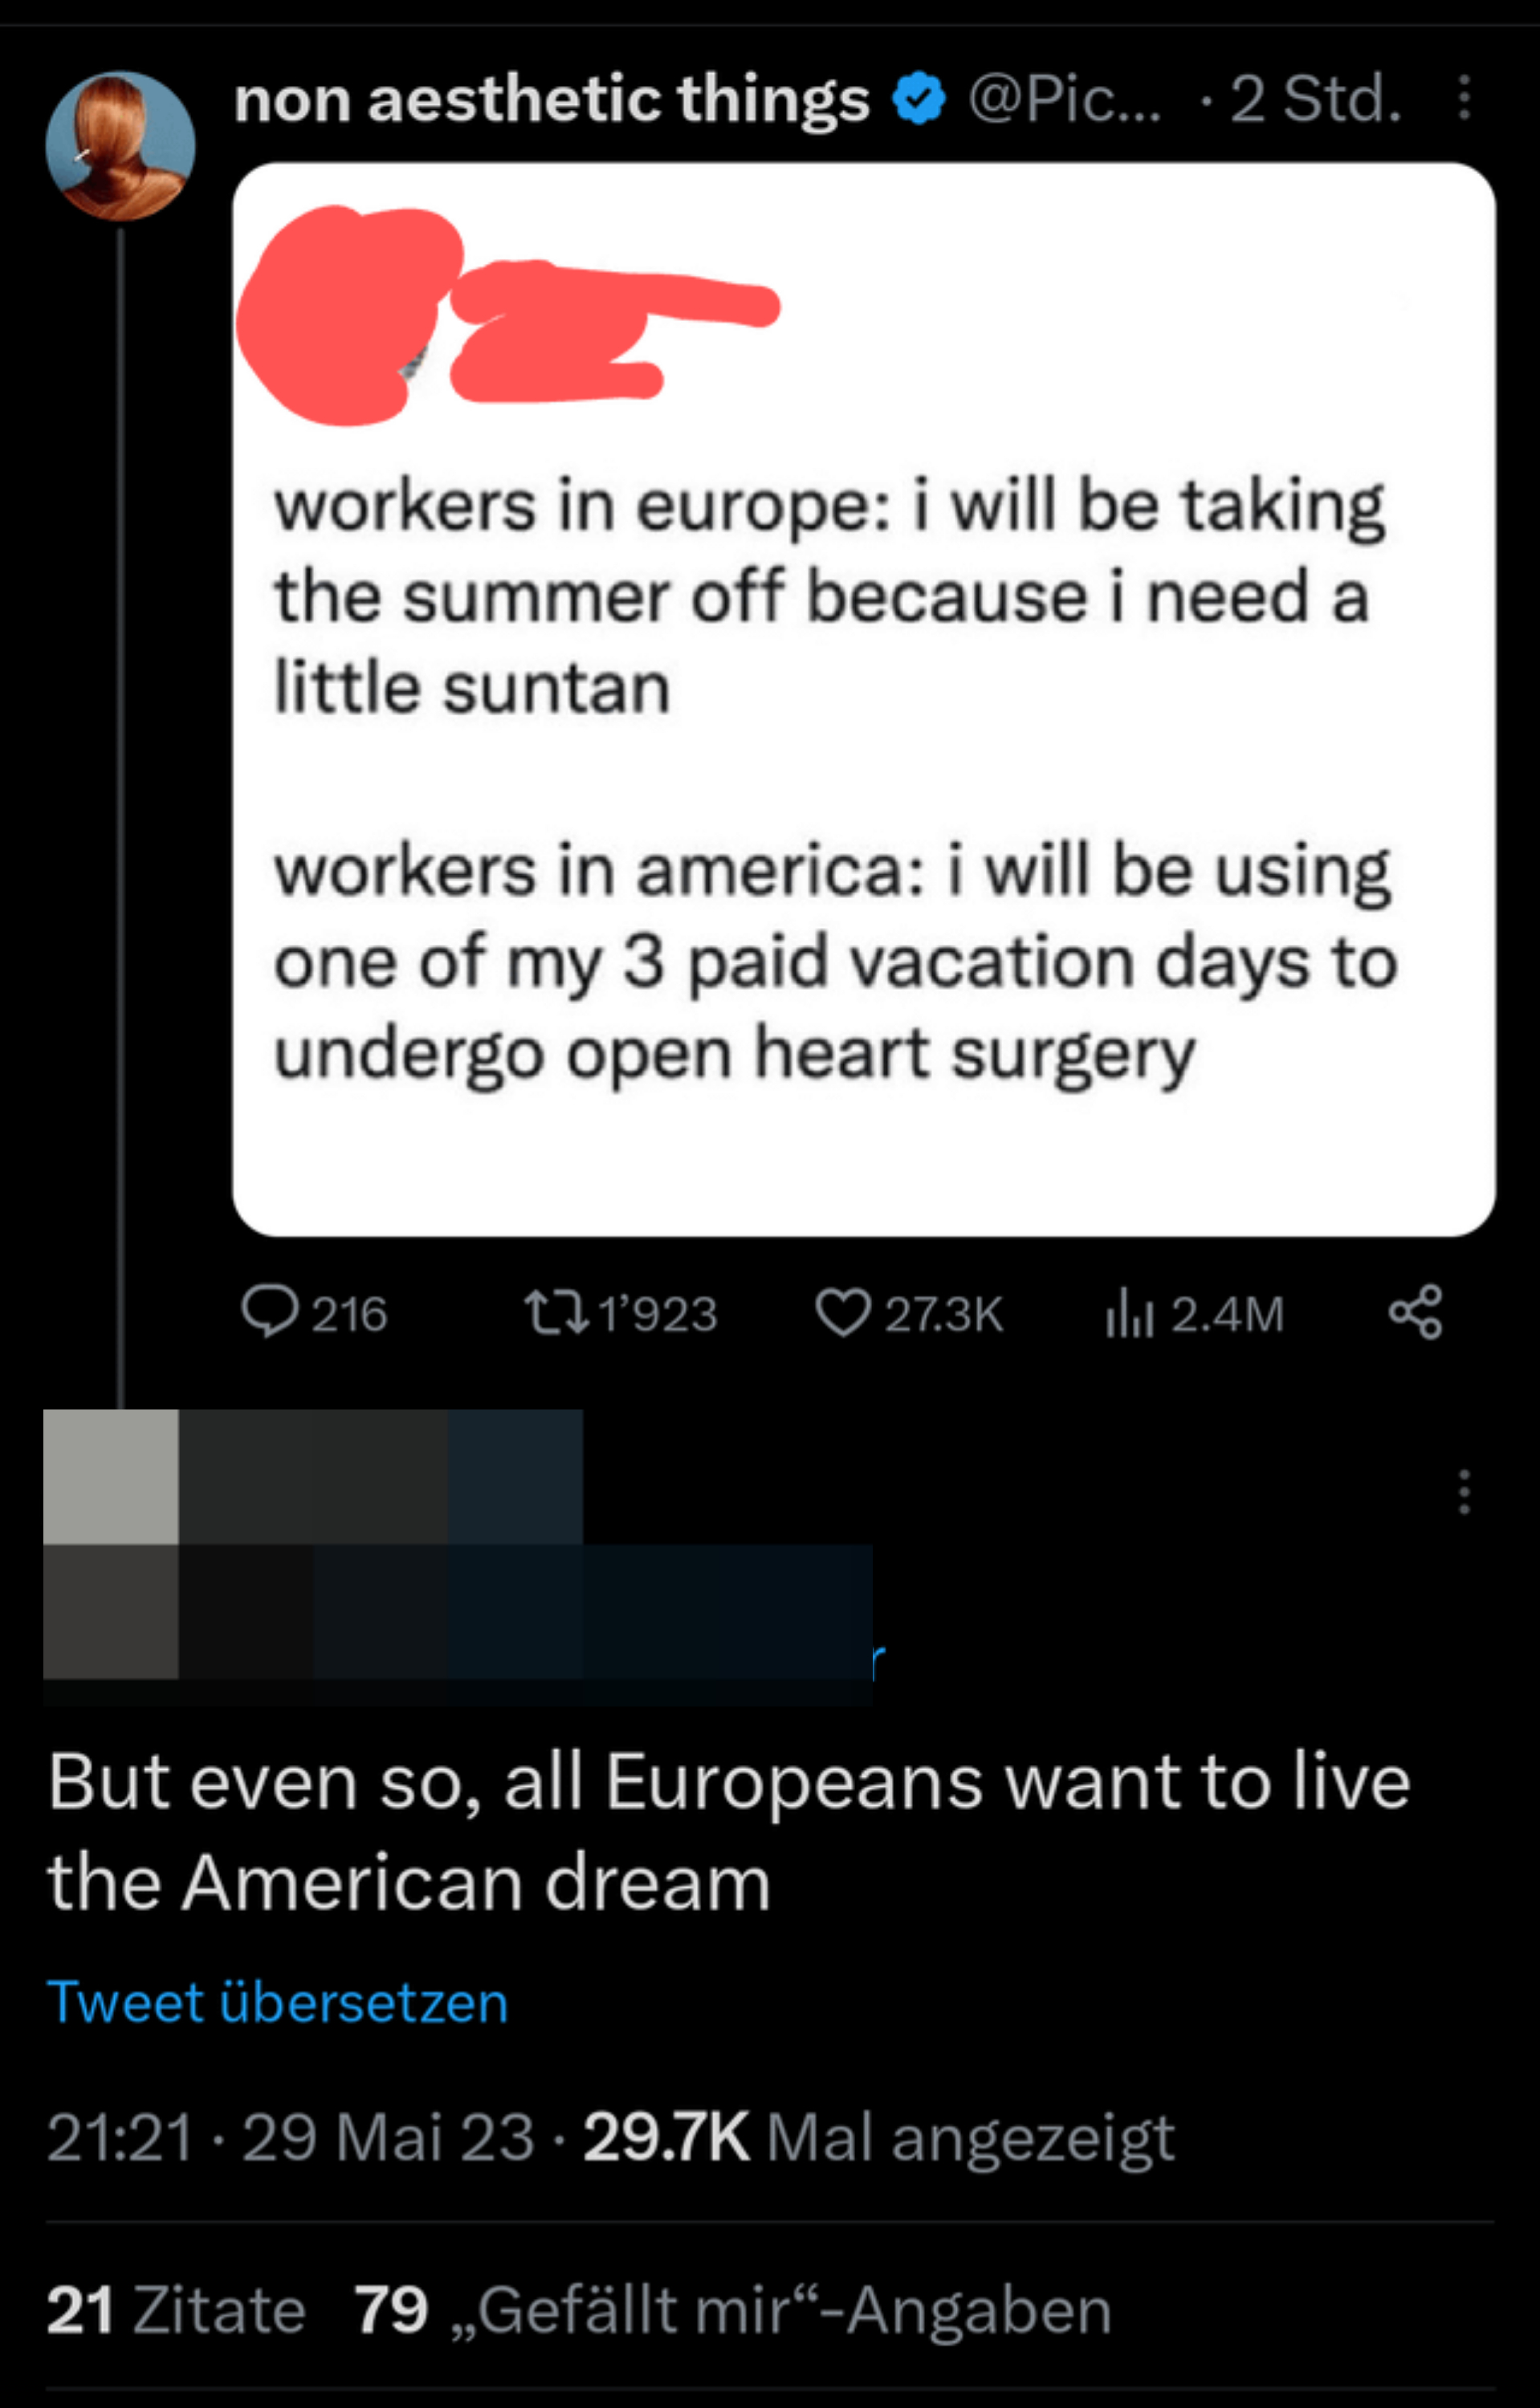 Someone posts a meme celebrating how much more paid time off Europeans get than Americans, and an American responds &quot;Even so, all Europeans want to live the American dream&quot;